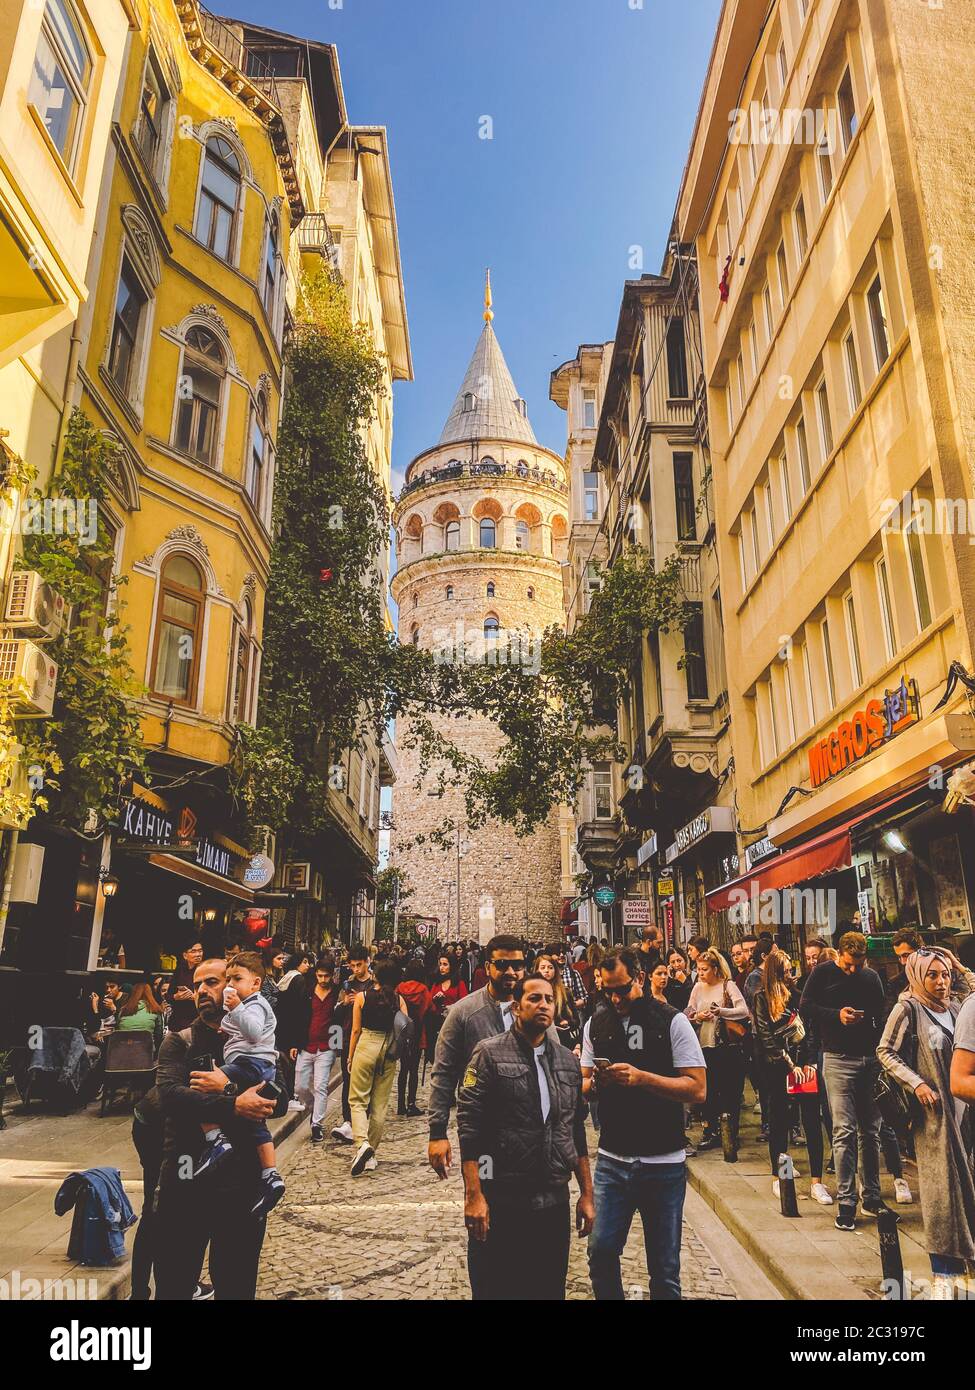 Galata Tower and the street in the Old Town of Istanbul, Turkey October 27, 2019. BELTUR Galata Kulesi or Galata tower in the ol Stock Photo